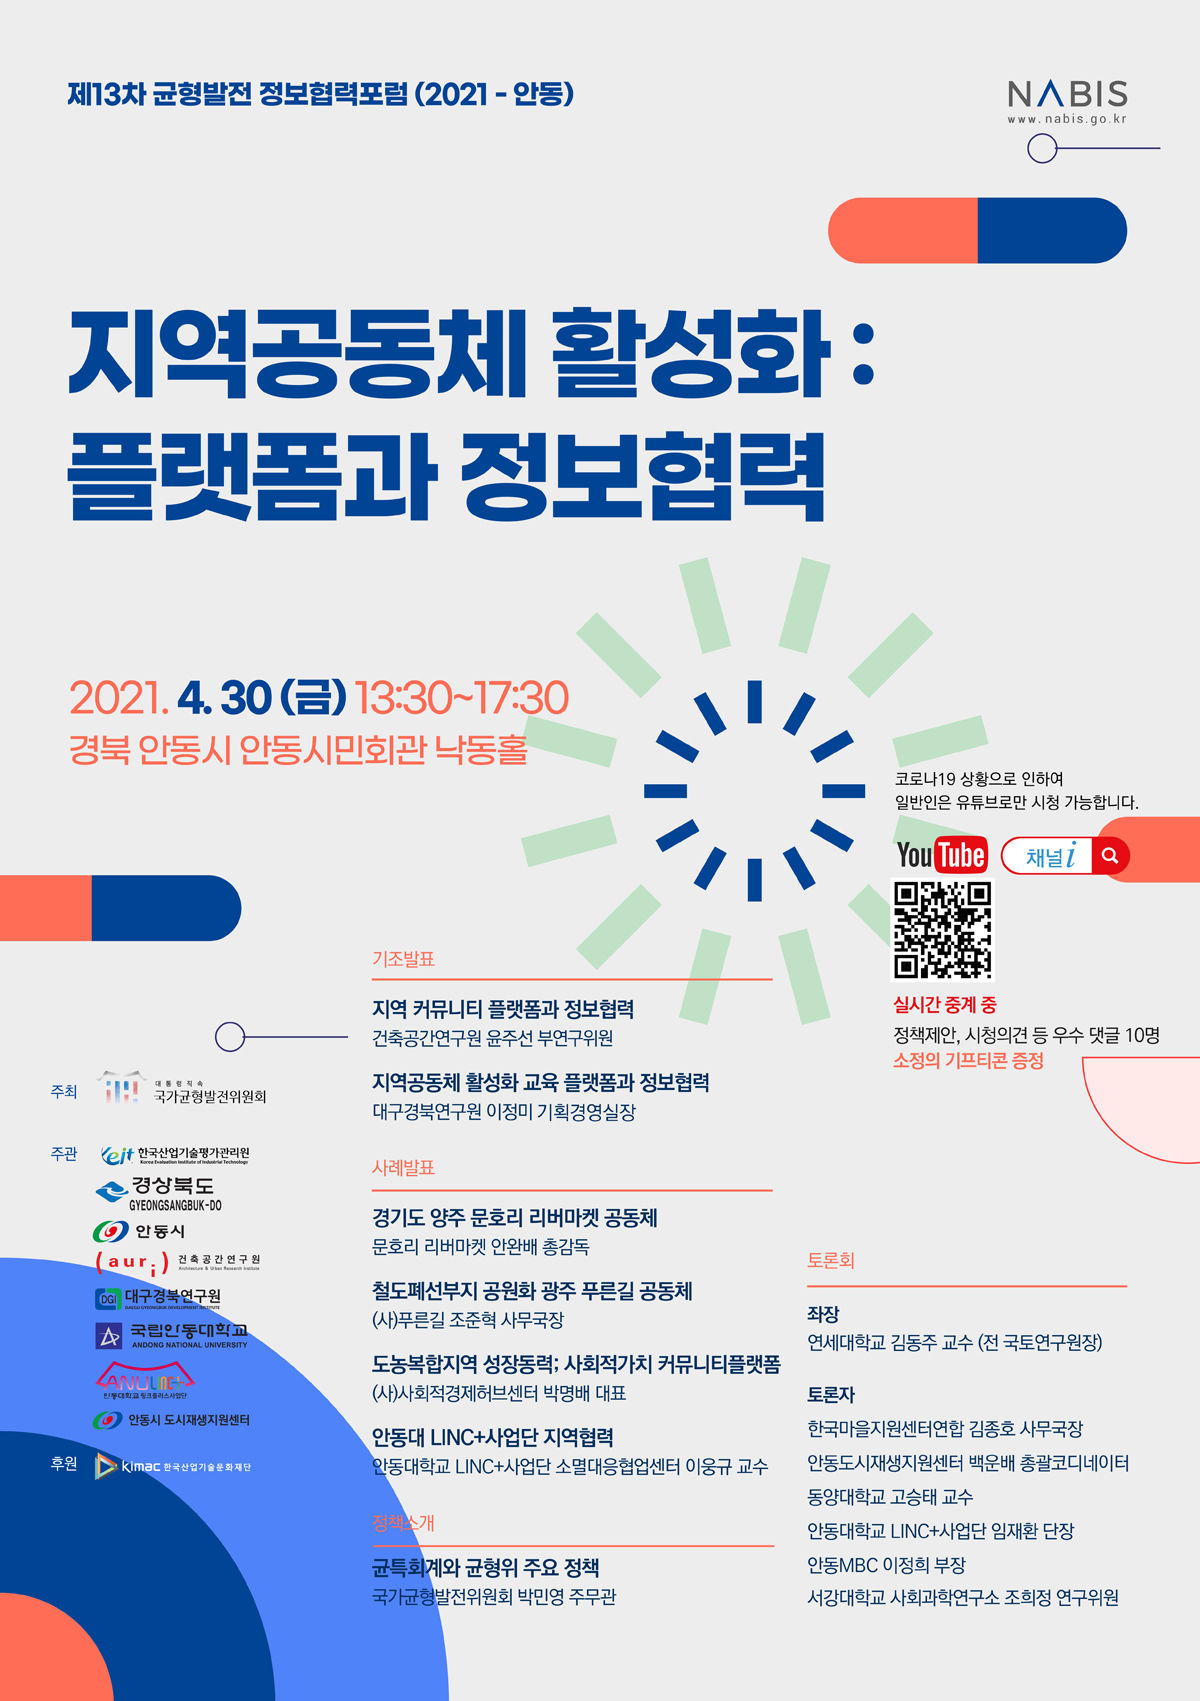 You are currently viewing 제13차 균형발전 정보협력포럼(2021-안동) 개최